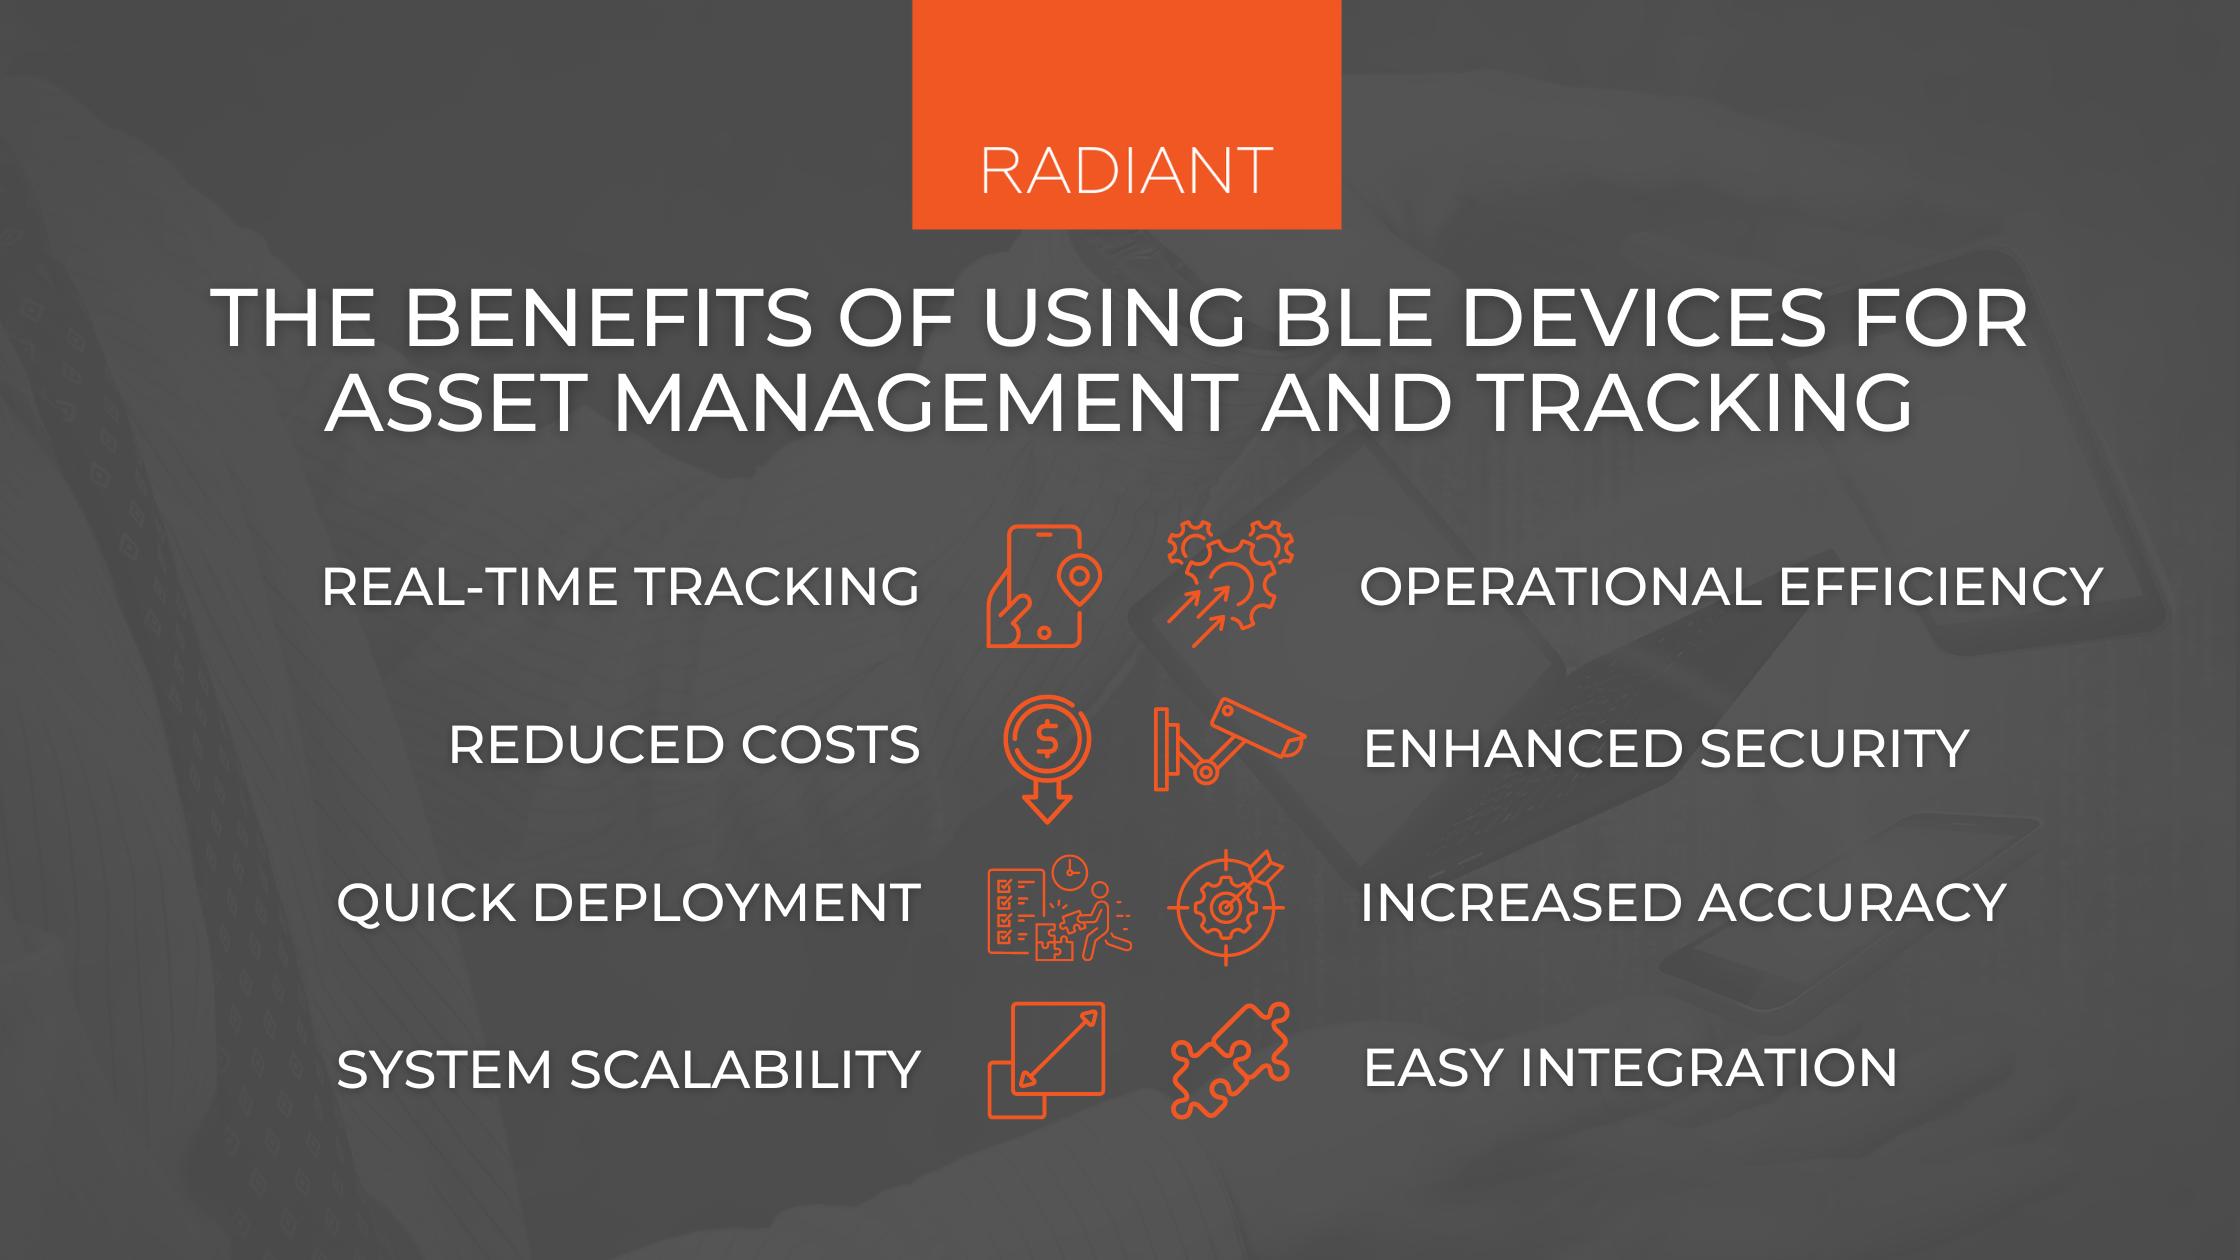 BLE Asset Tracking - BLE Asset Management - BLE Asset Tracking Solution - BLE Devices - Bluetooth Low Energy Devices - BLE Asset Management Solution BLE Readers - BLE Tracking Tags - BLE Device - Bluetooth Low Energy Technology - BLE Beacons - BLE Tracking Device - IoT Asset Tracking - IoT Asset Management